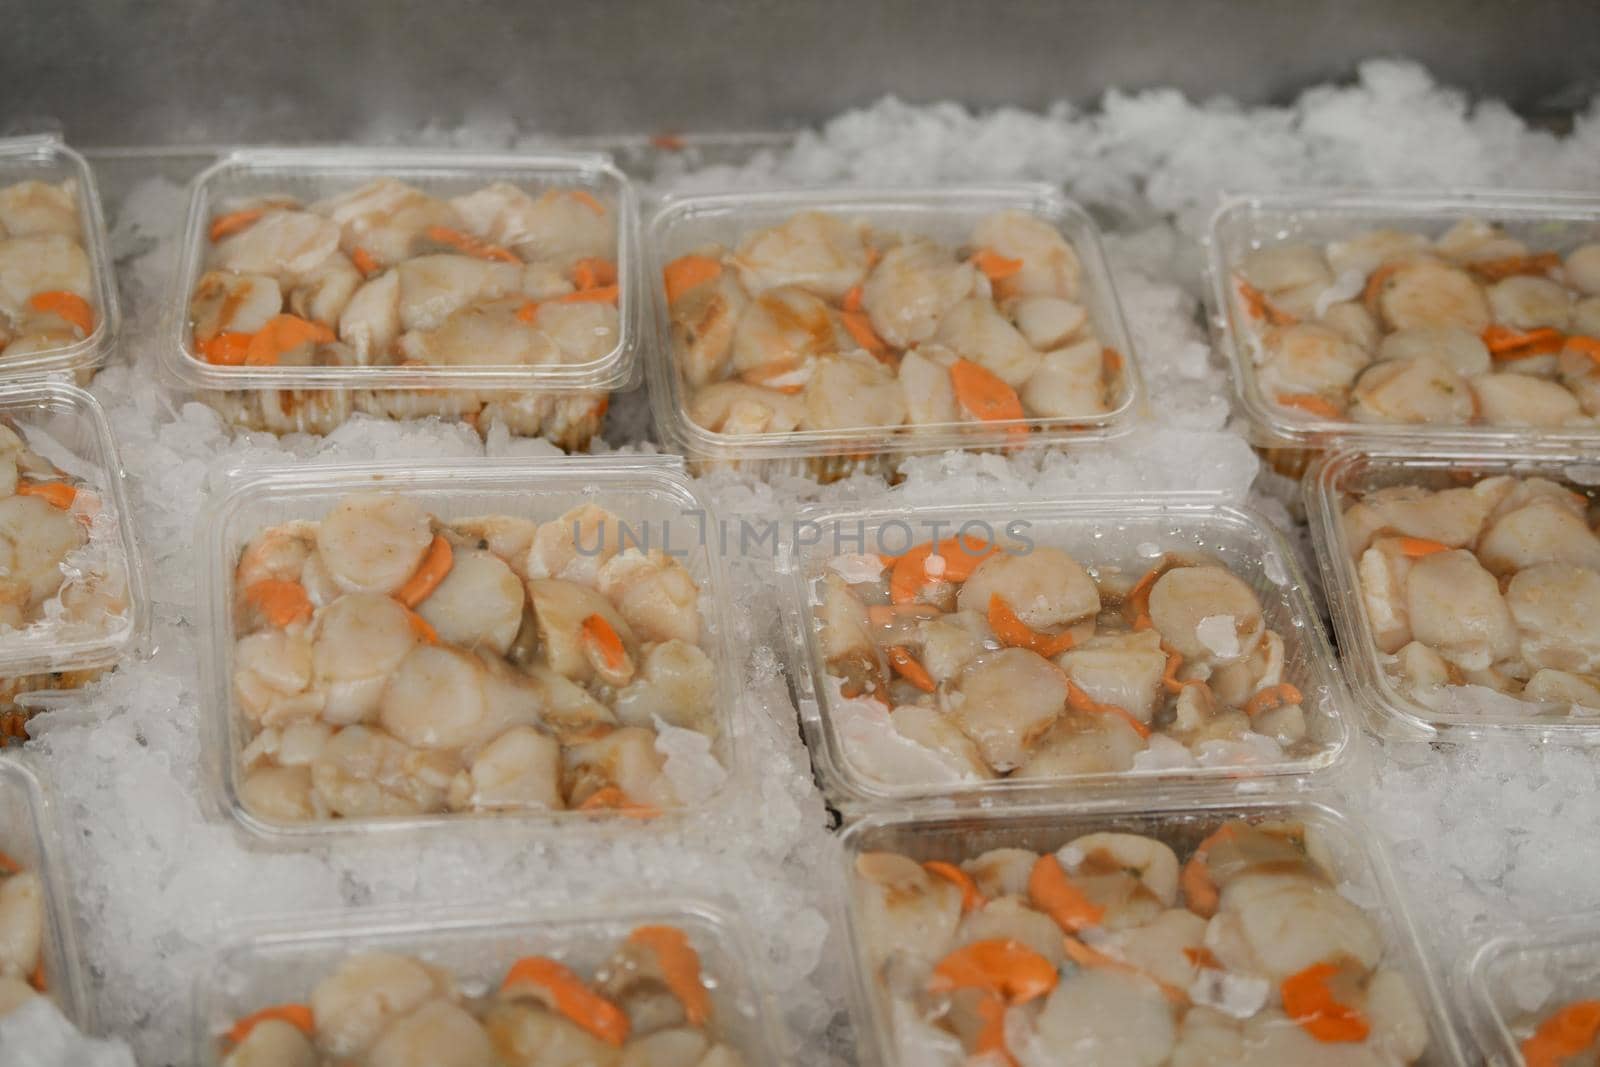 Fresh french scallops on a seafood market at Dieppe France